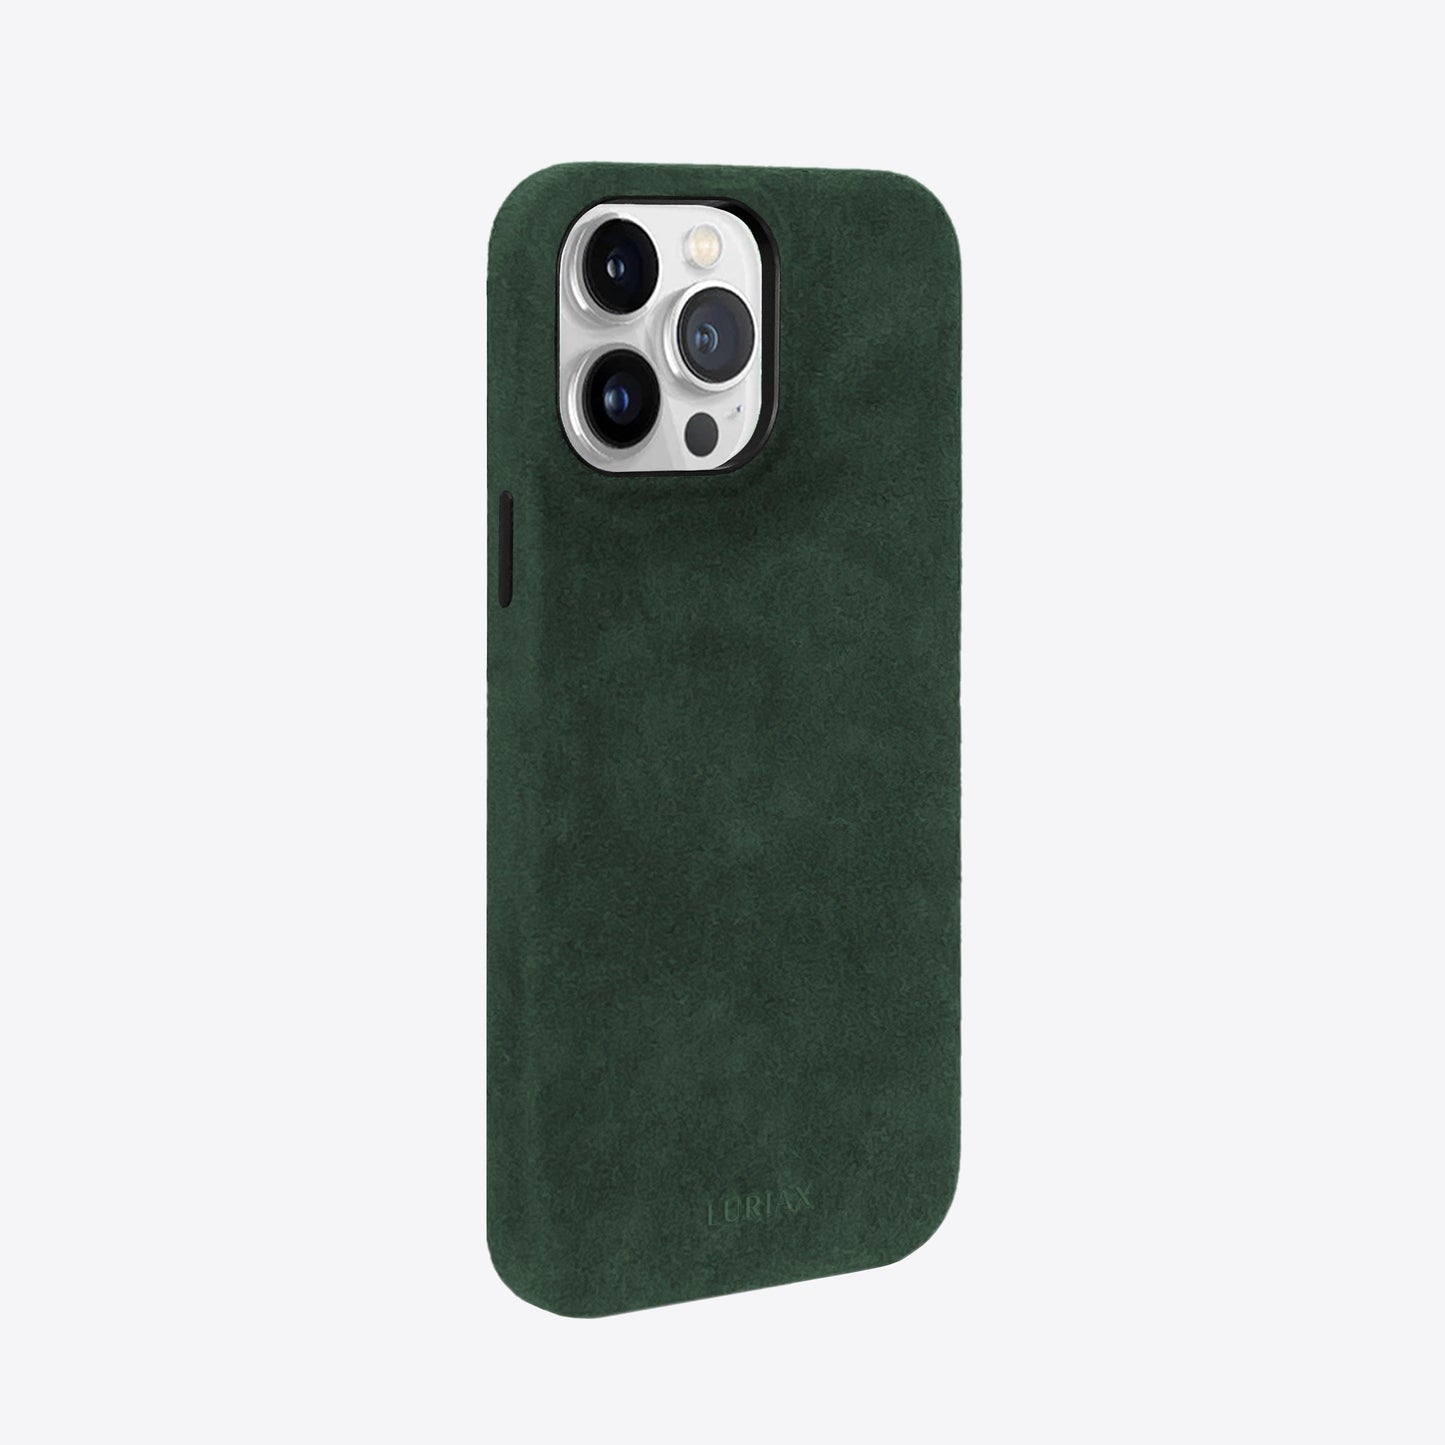 Alcantara Suede Leather iPhone Case and Accessories Collection - The Classic iPhone Case V2 - British Racing Green - Luriax